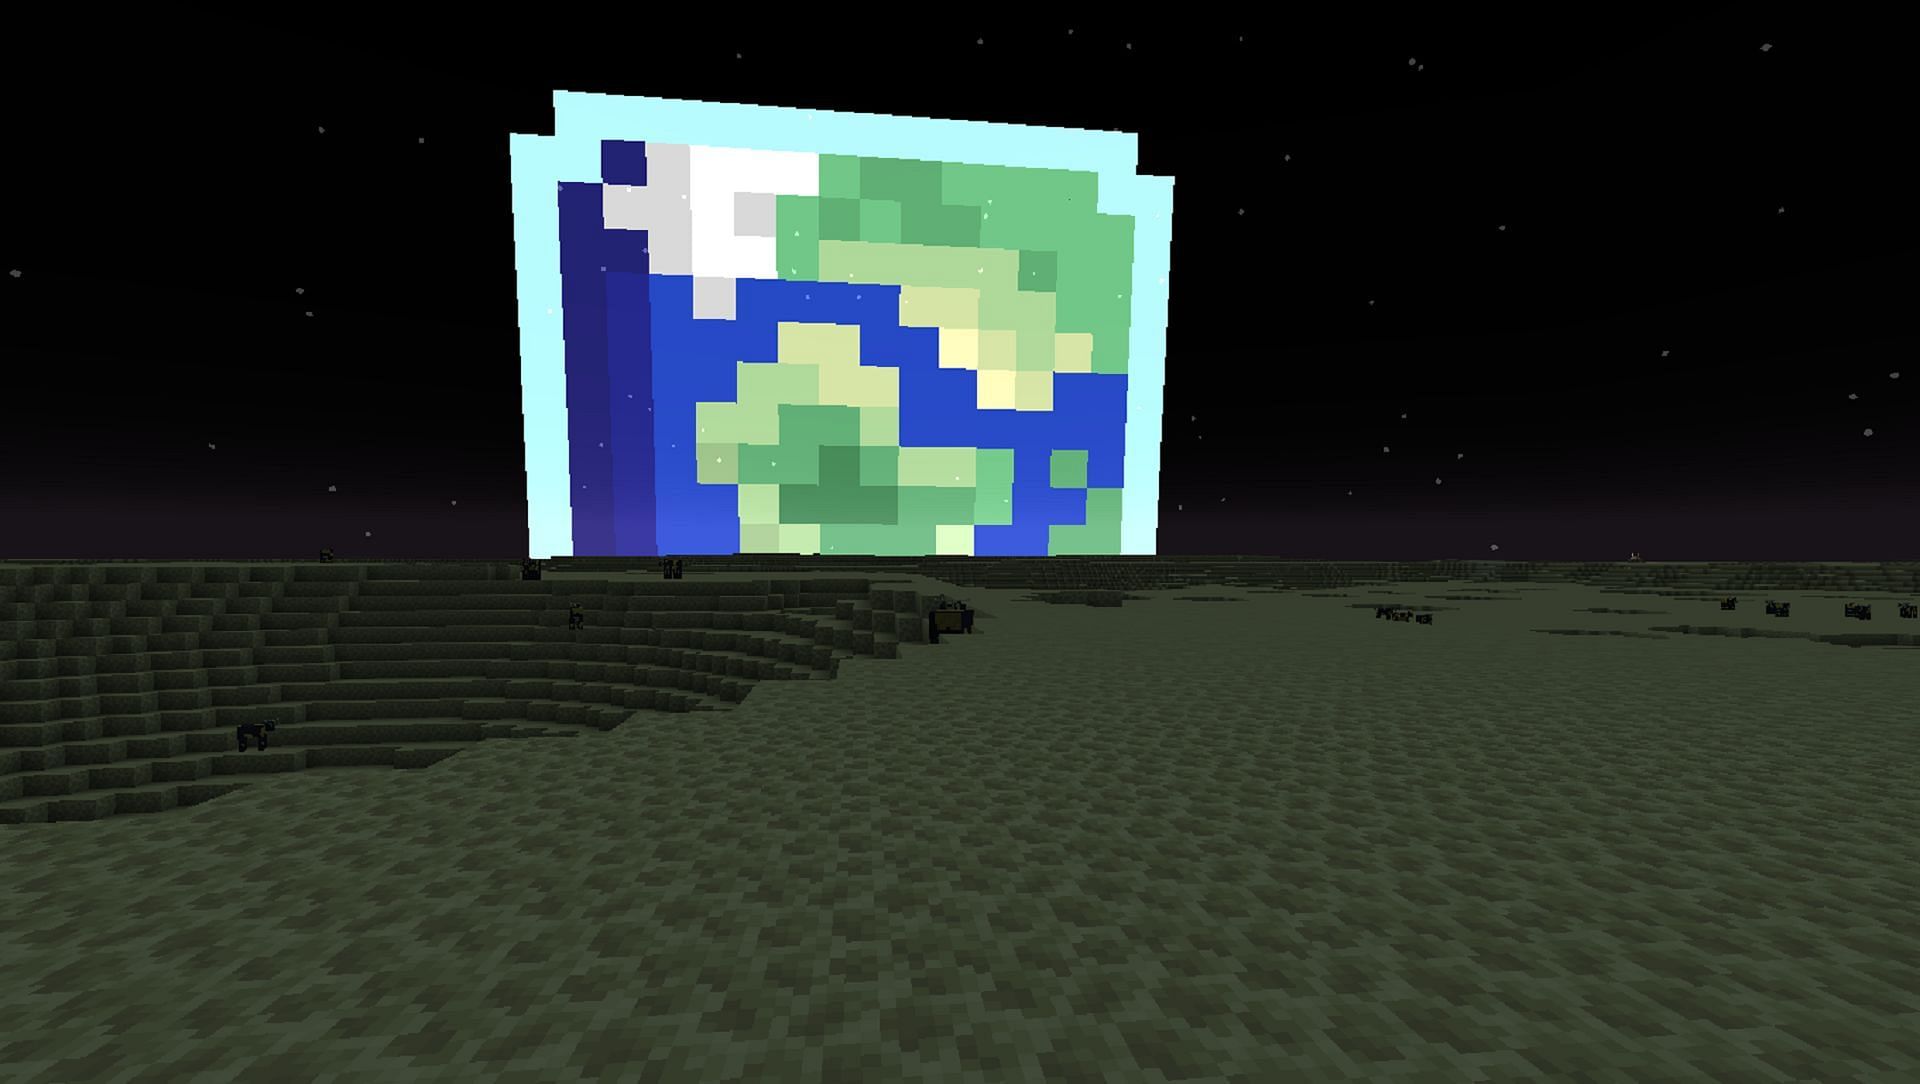 Minecraft players share their opinion on Moon dimension in April Fools